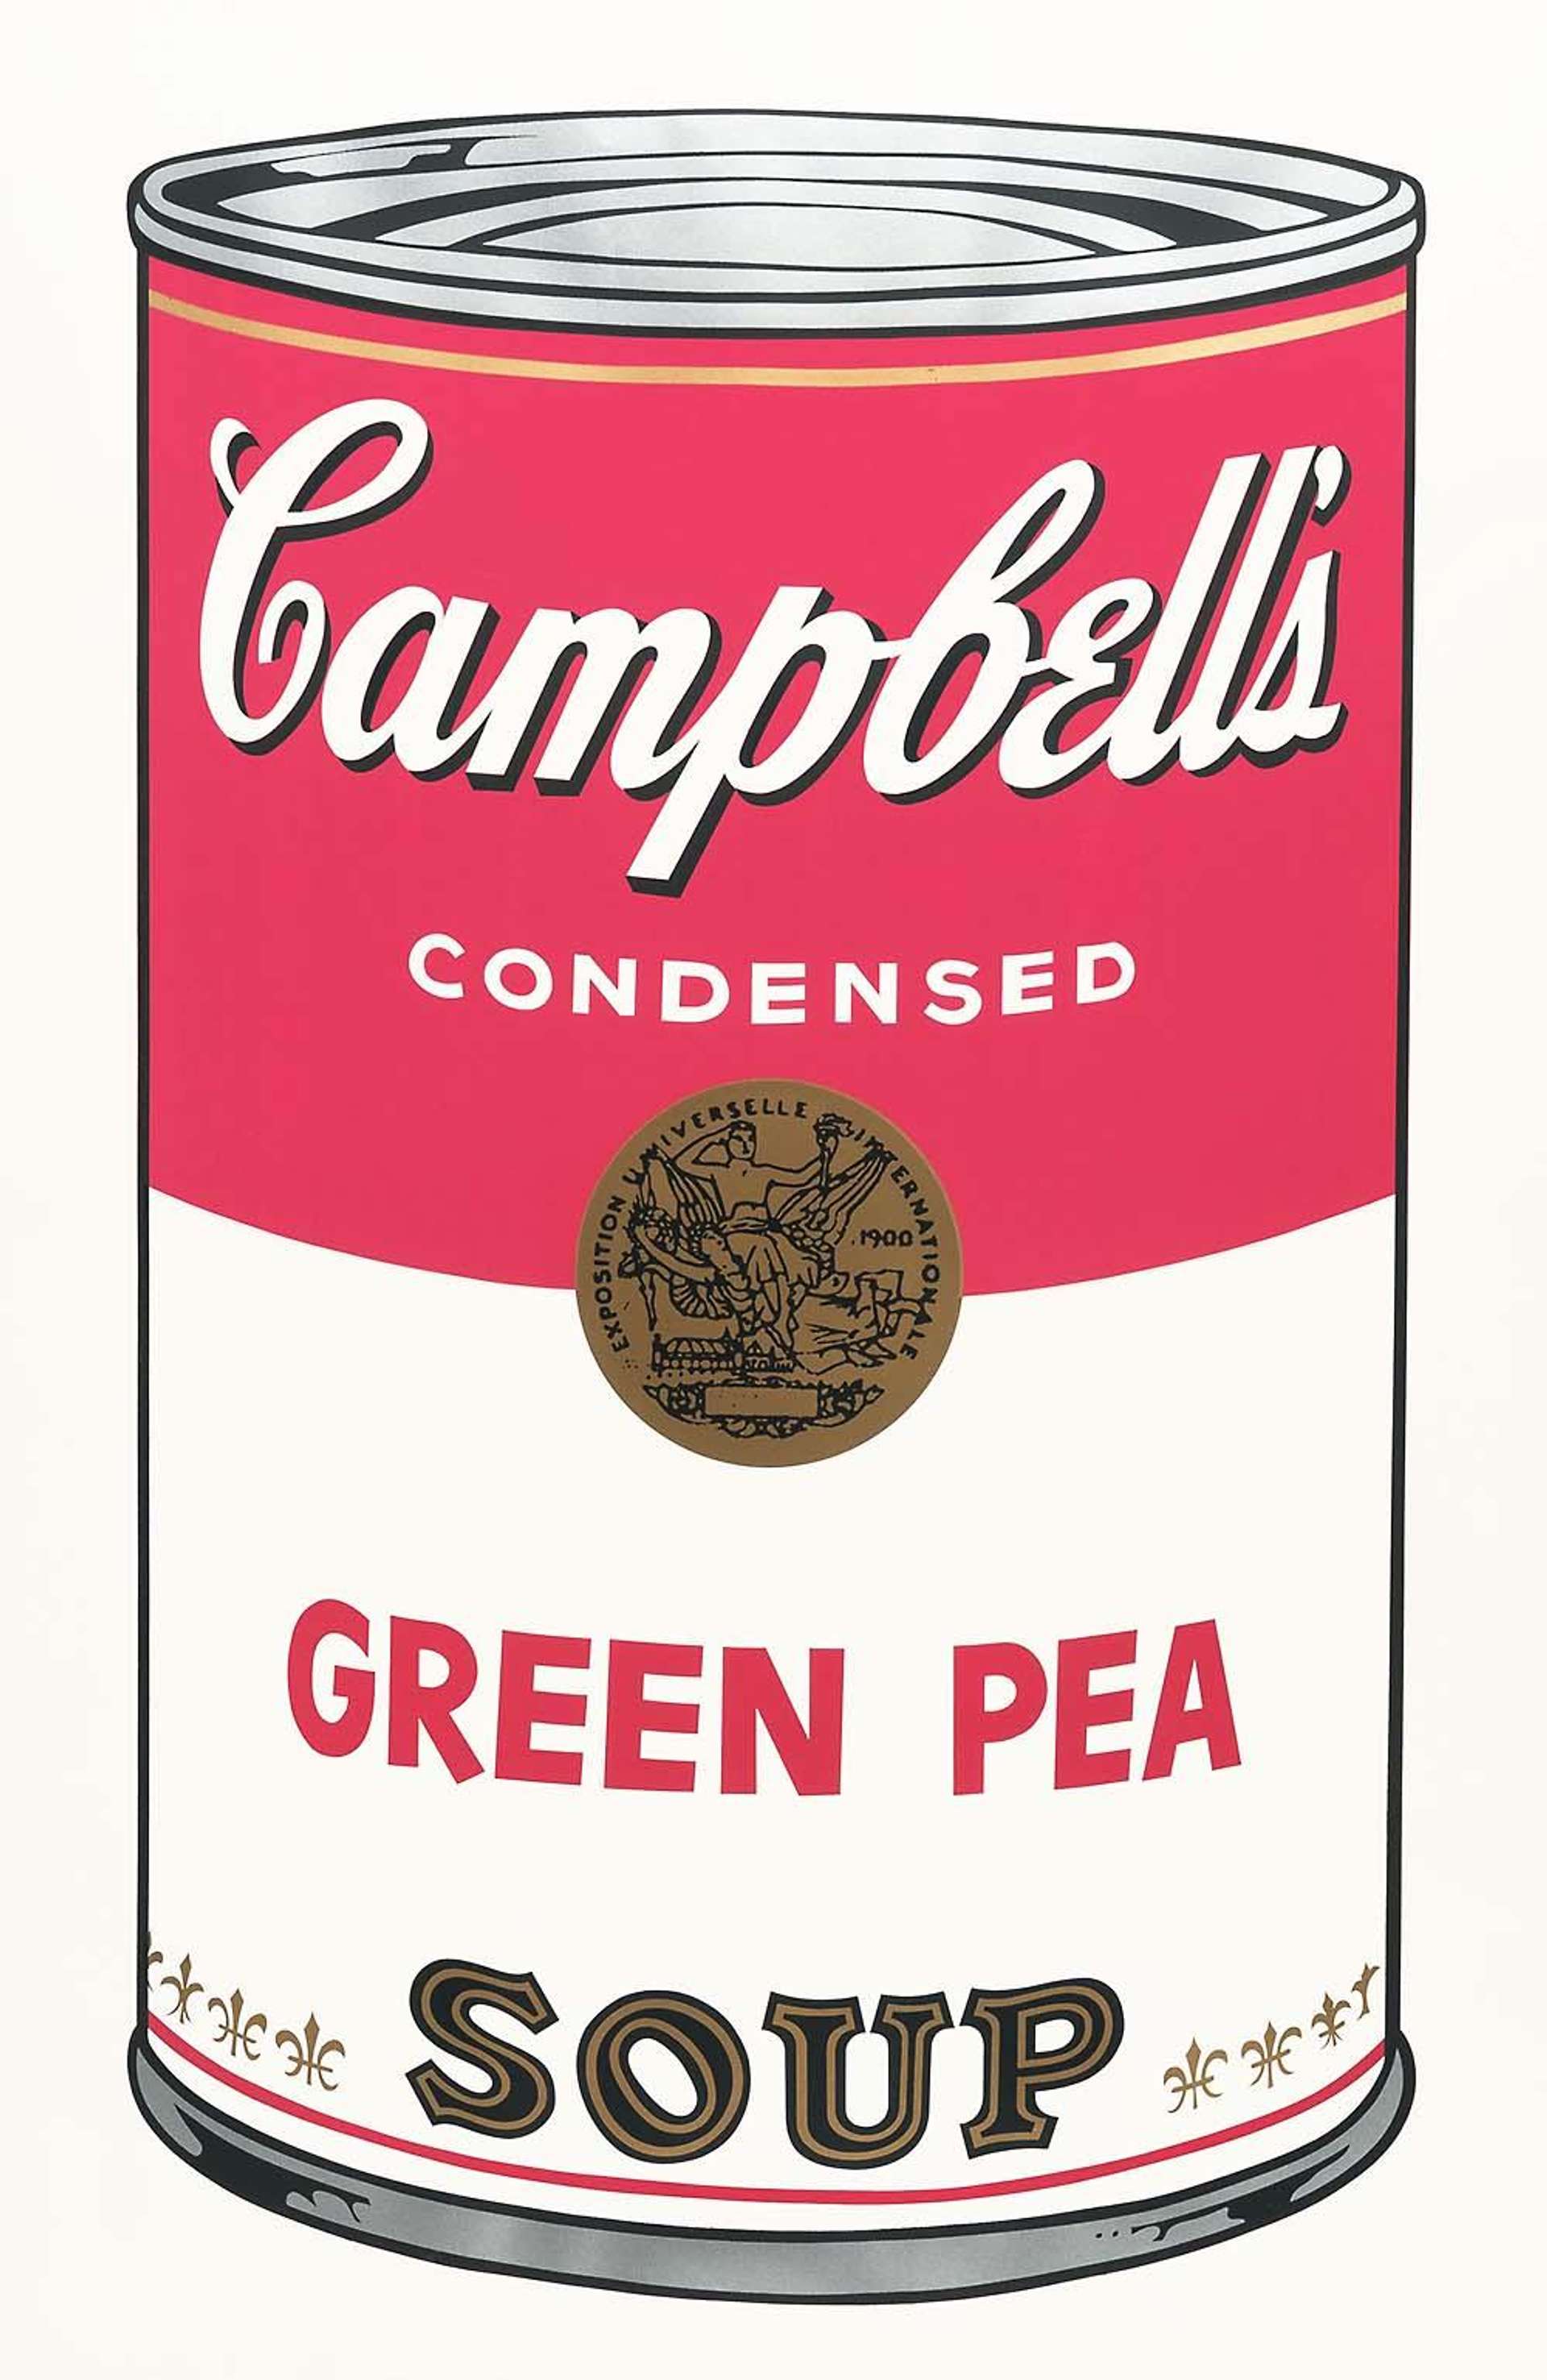 Campbell's Soup I, Green Pea (F. & S. II.50) - Signed Print by Andy Warhol 1968 - MyArtBroker